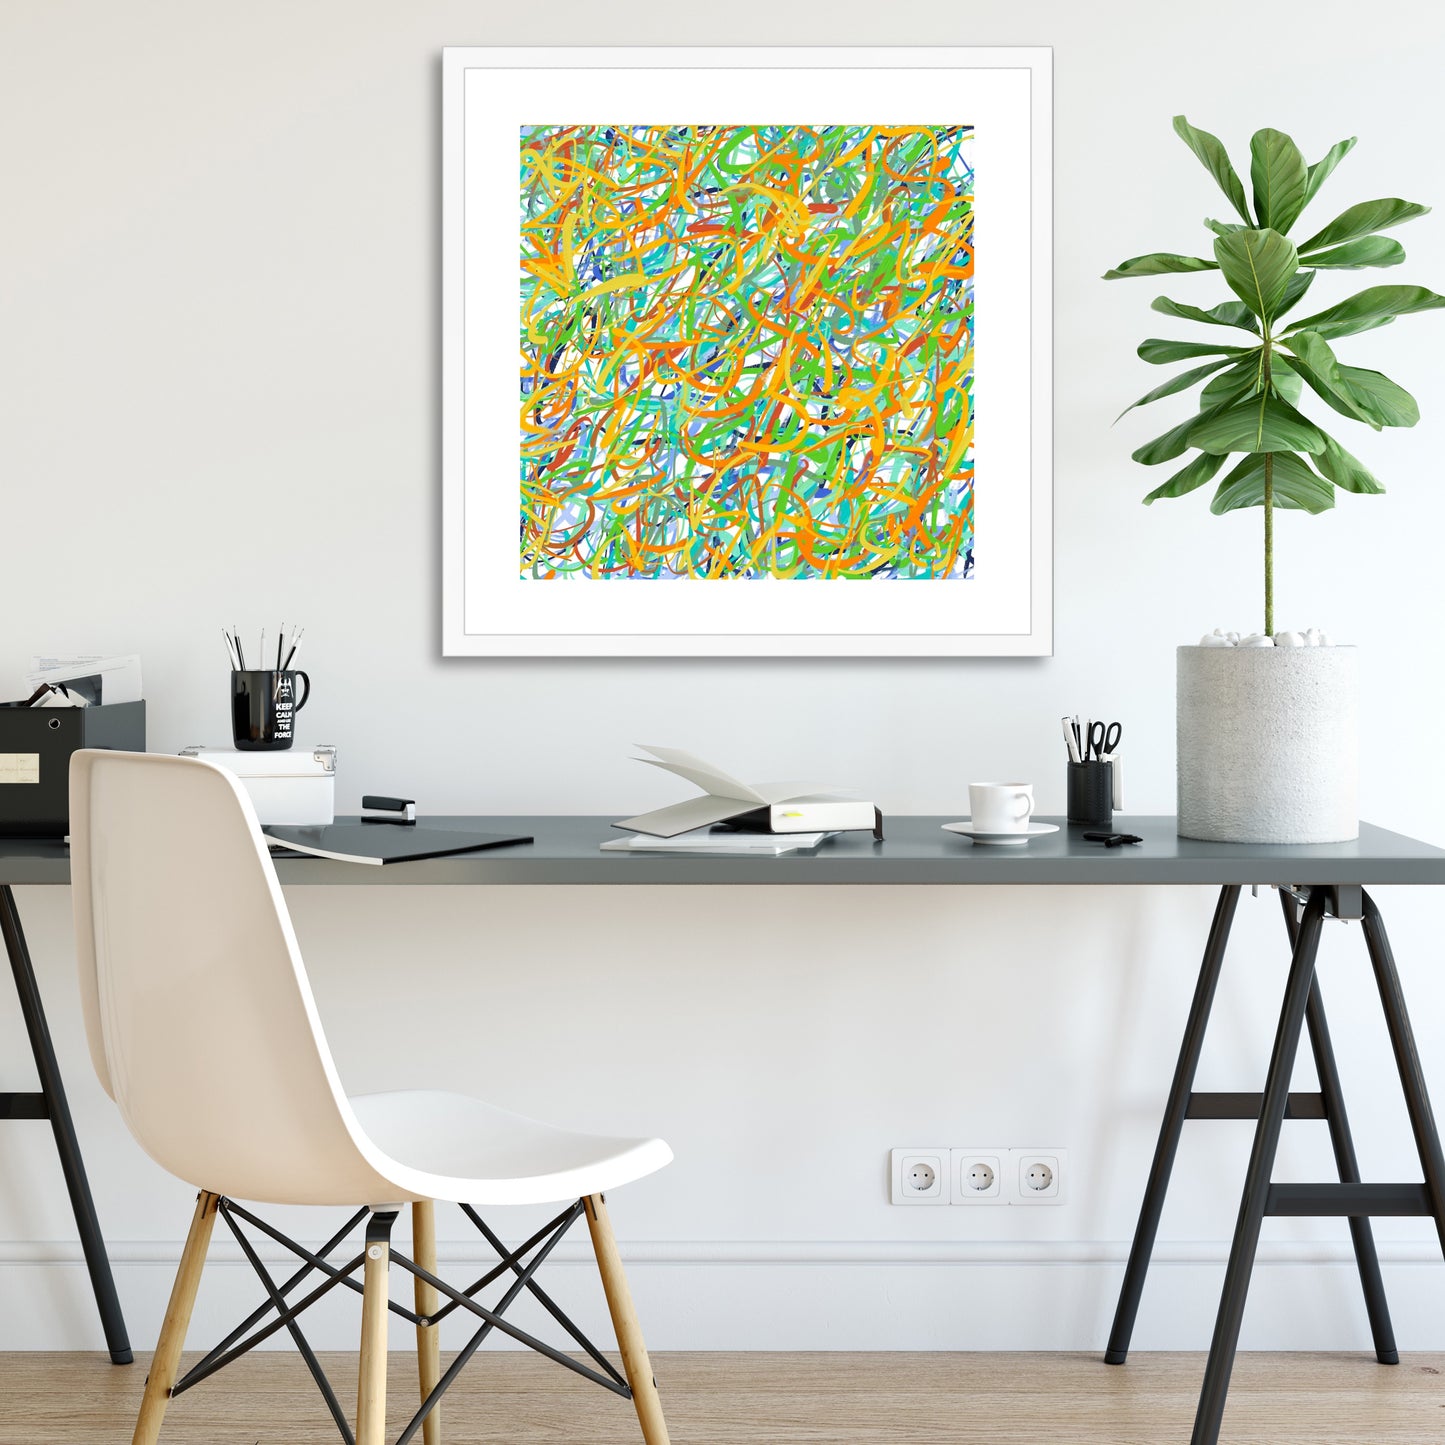 In a white room above a modern grey and black desk with white chair and desk accessories hangs 'Fishing Boats On The Beach' with bright yellows, reds and greens tangled together with sky-blue, sea-blues and greens - with white mount in white frame.